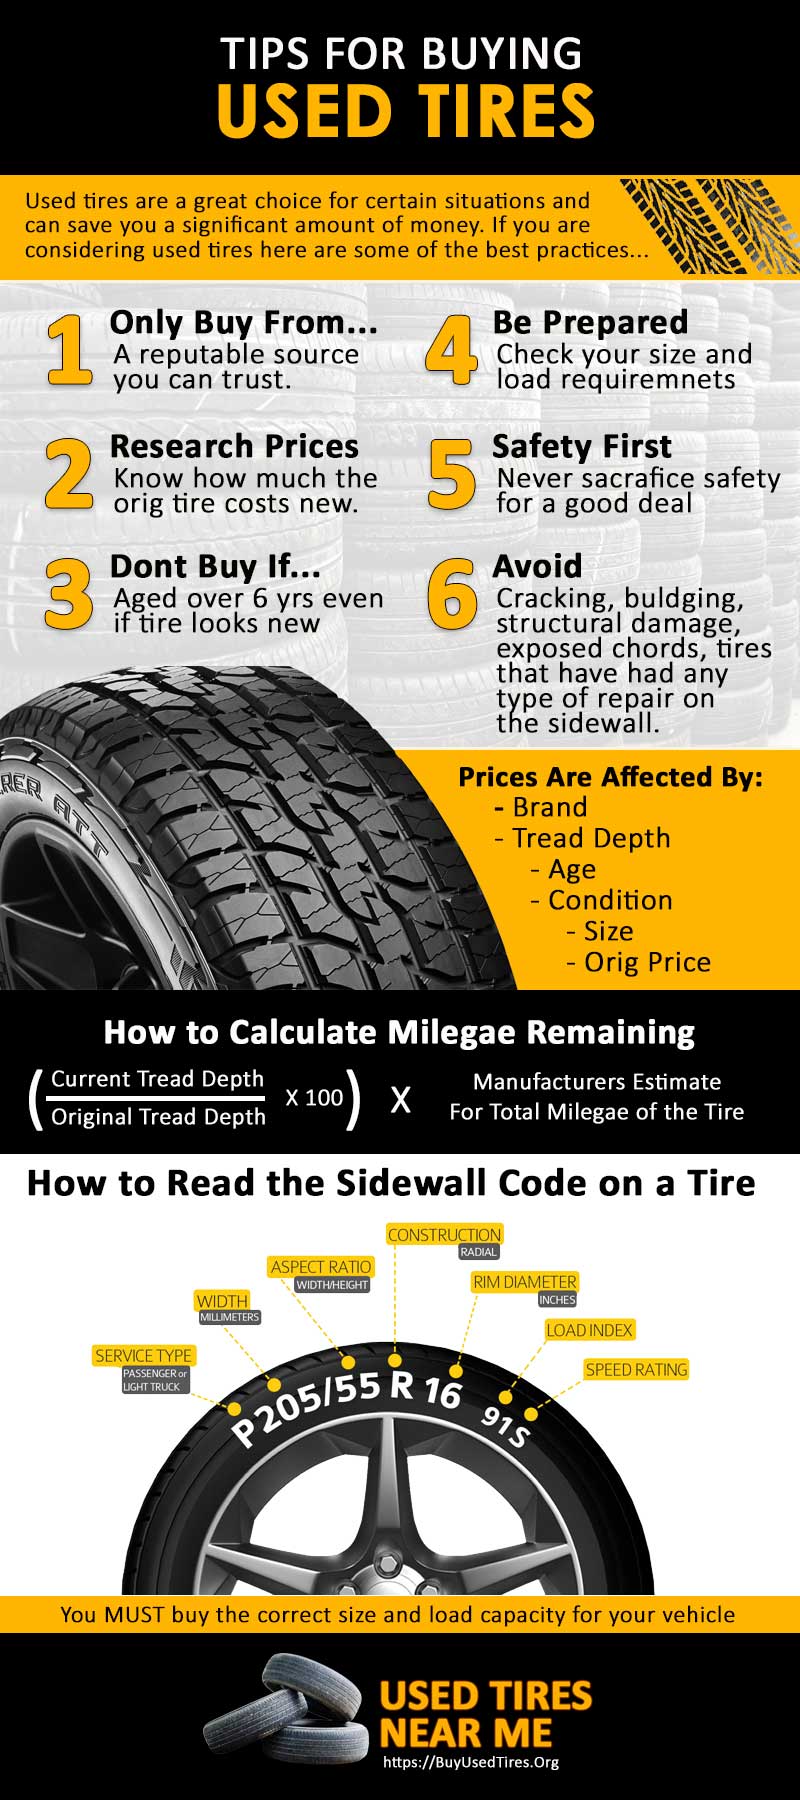 6 Tips for Buying Used Tires